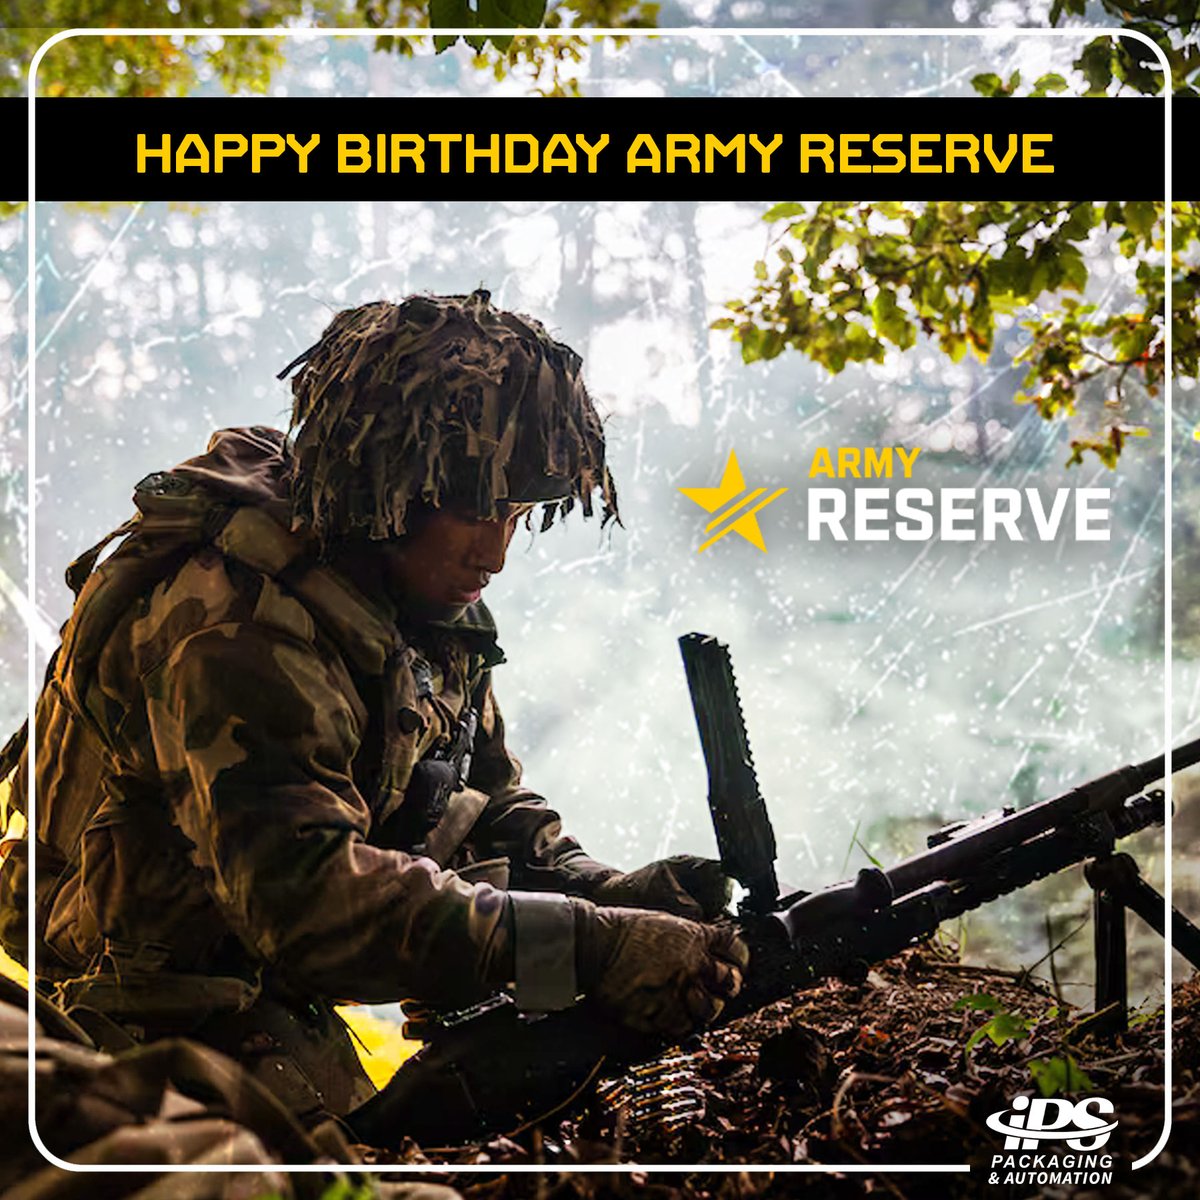 Happy Birthday to the Army Reserve! Today, the Army Reserve continues to provide support to active duty troops and to serve as an important part of the nation's defense.

#Packaging #PackagingIsAwesome #PackagingIndustry #Automation #PackagingDesign #IPSPackagingAndAutomation